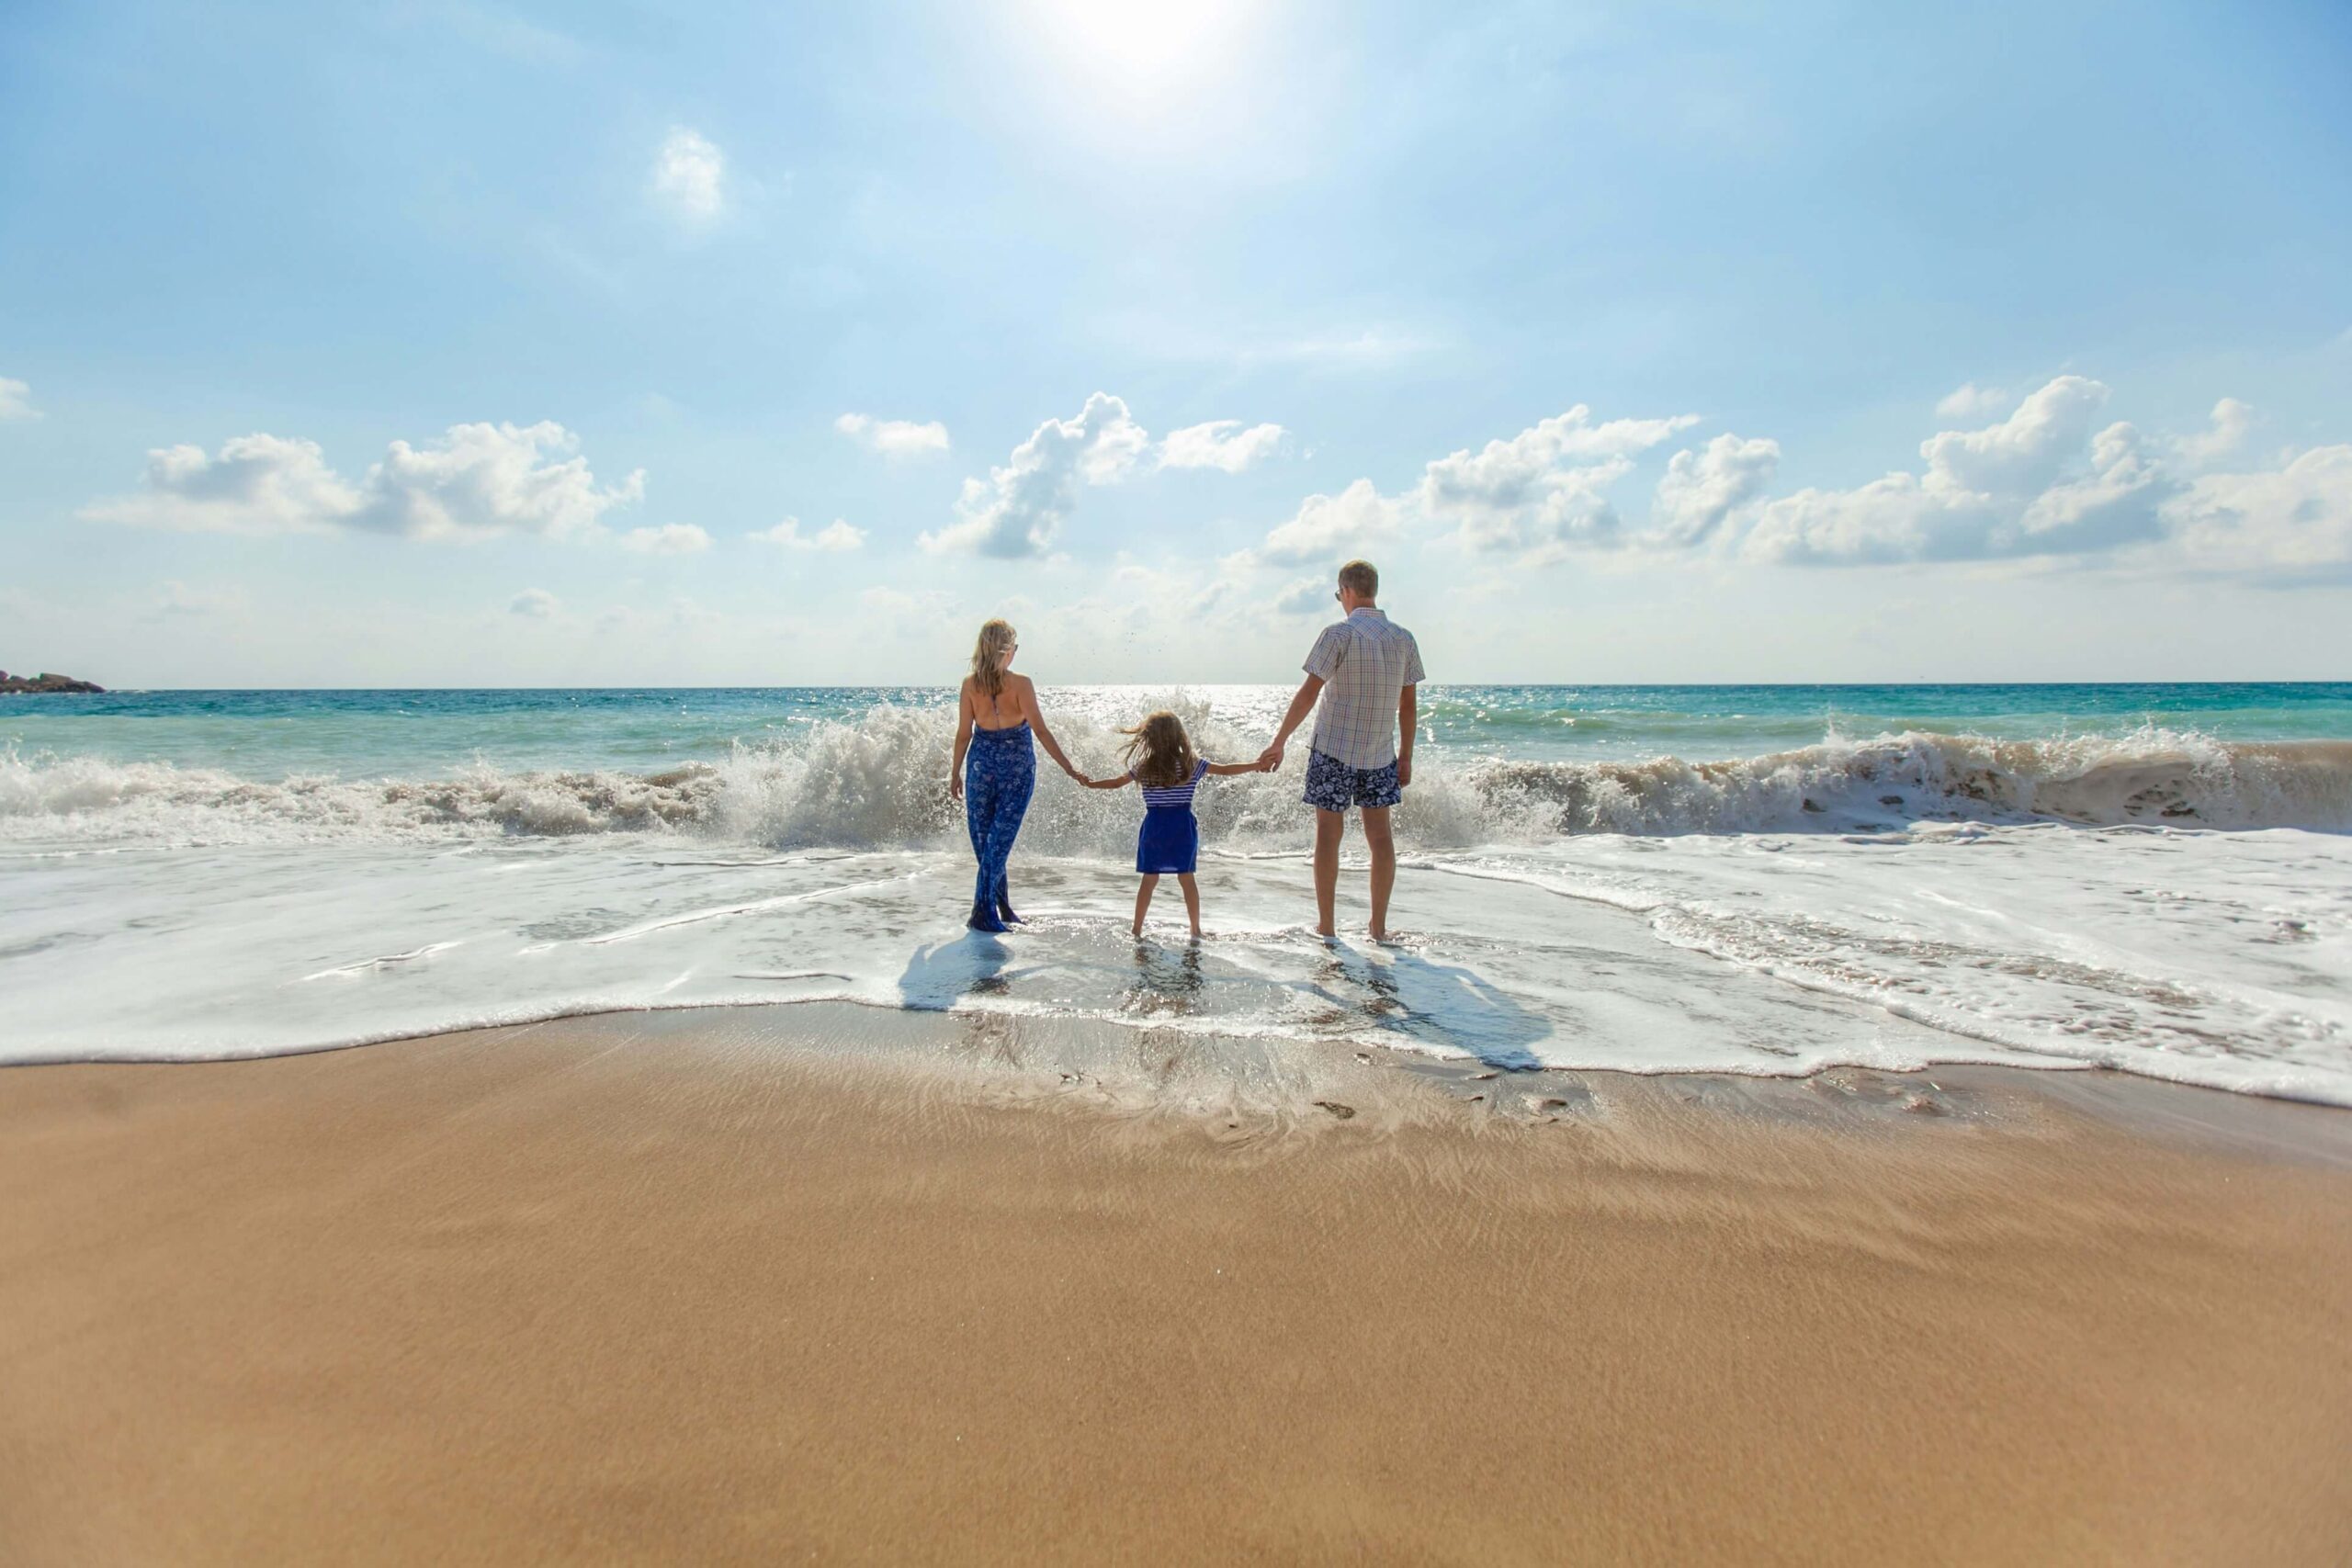 Image of a happy family standing on the beach holding hands on a sunny day. With the help of a trauma therapist in Saint Petersburg, FL you can work on your past trauma and begin coping with your symptoms.